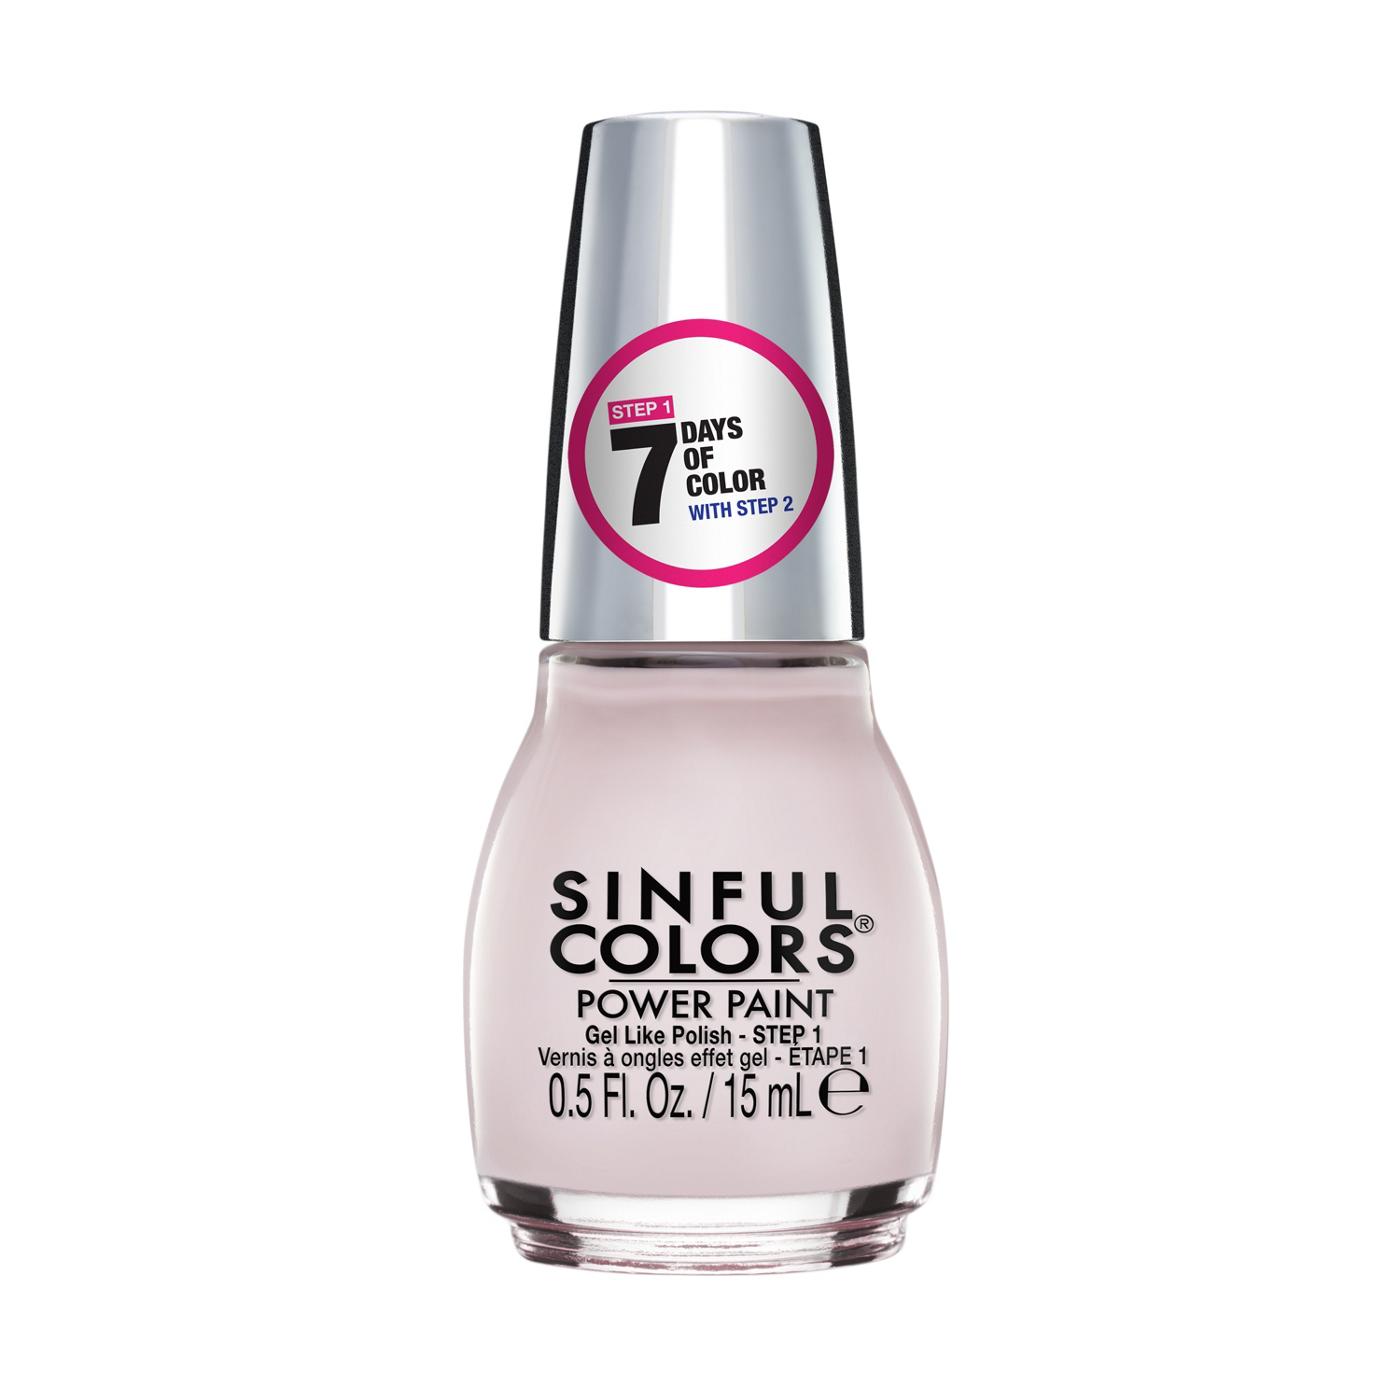 Sinful Colors Power Paint Nail Polish - Thrilled; image 1 of 5